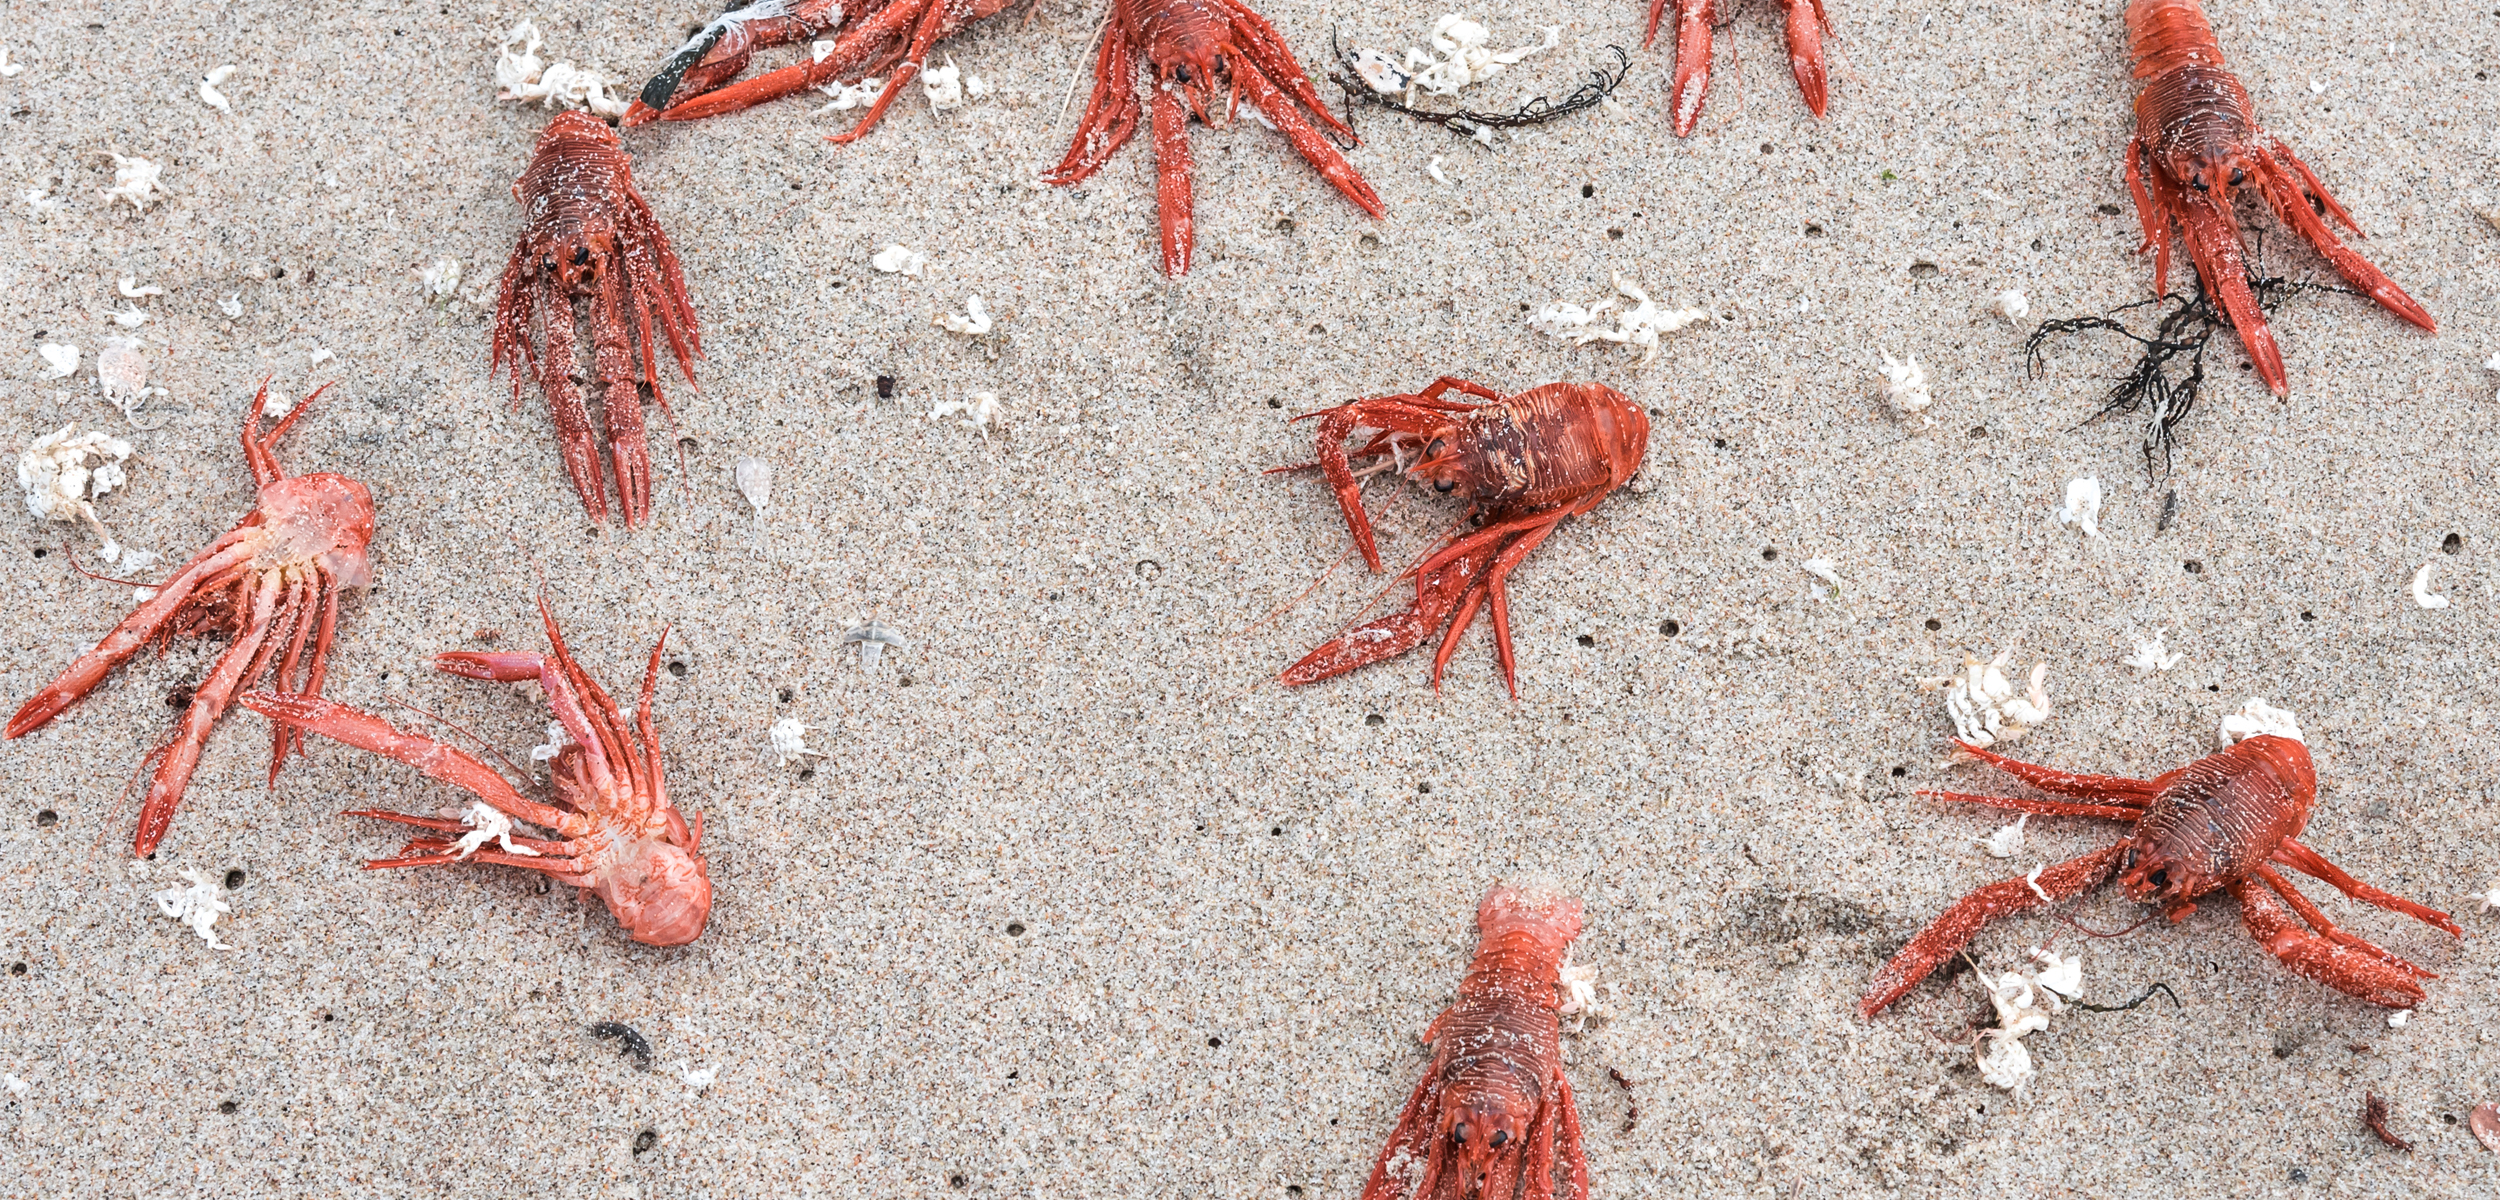 a white sand beach with red crabs littering the beach.